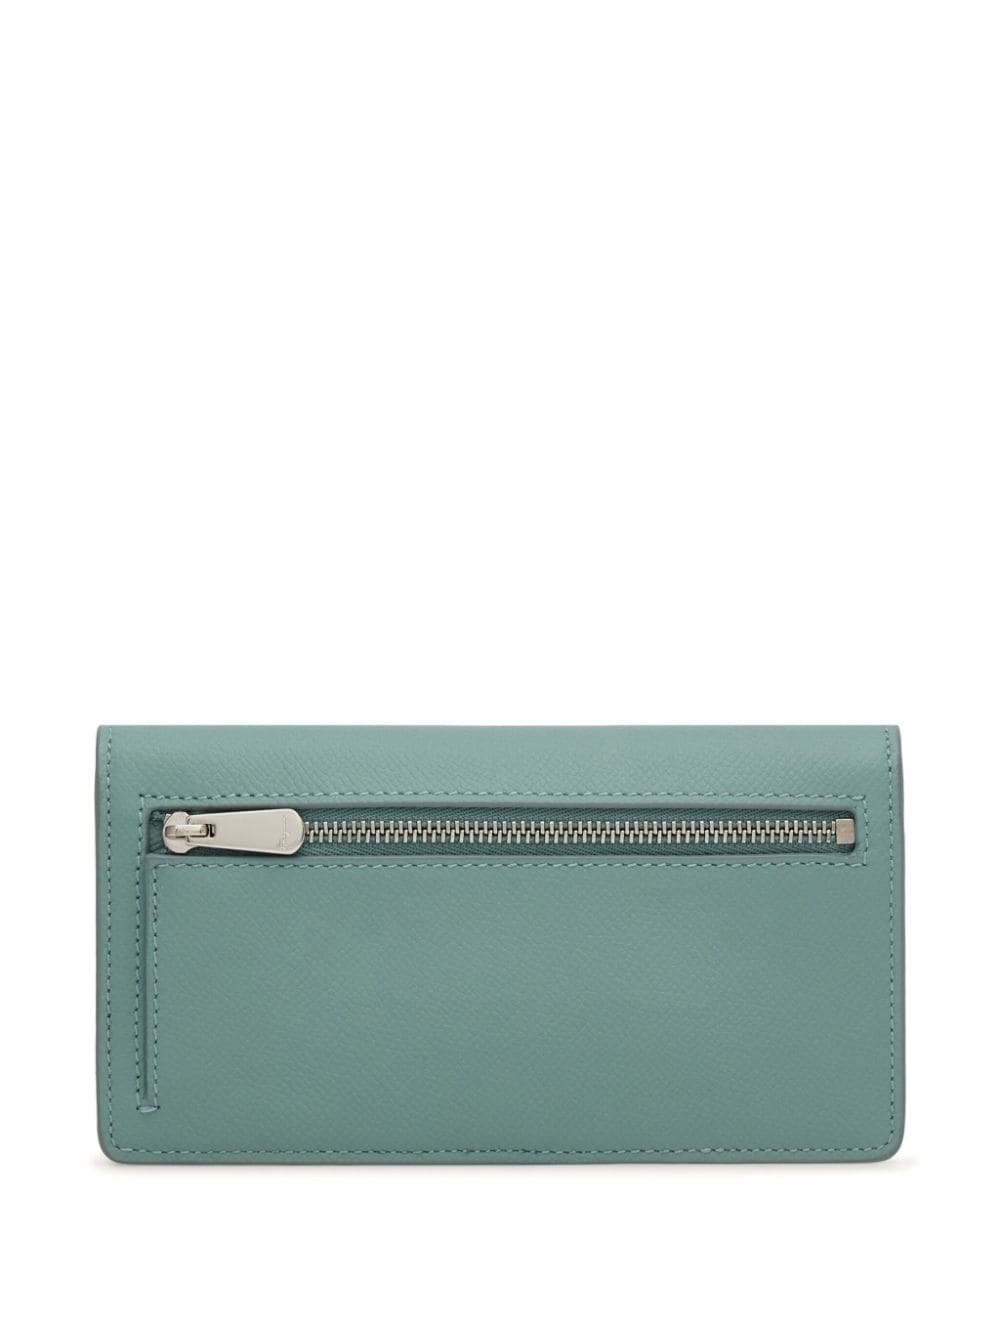 Gancini-buckle leather continental wallet - 2